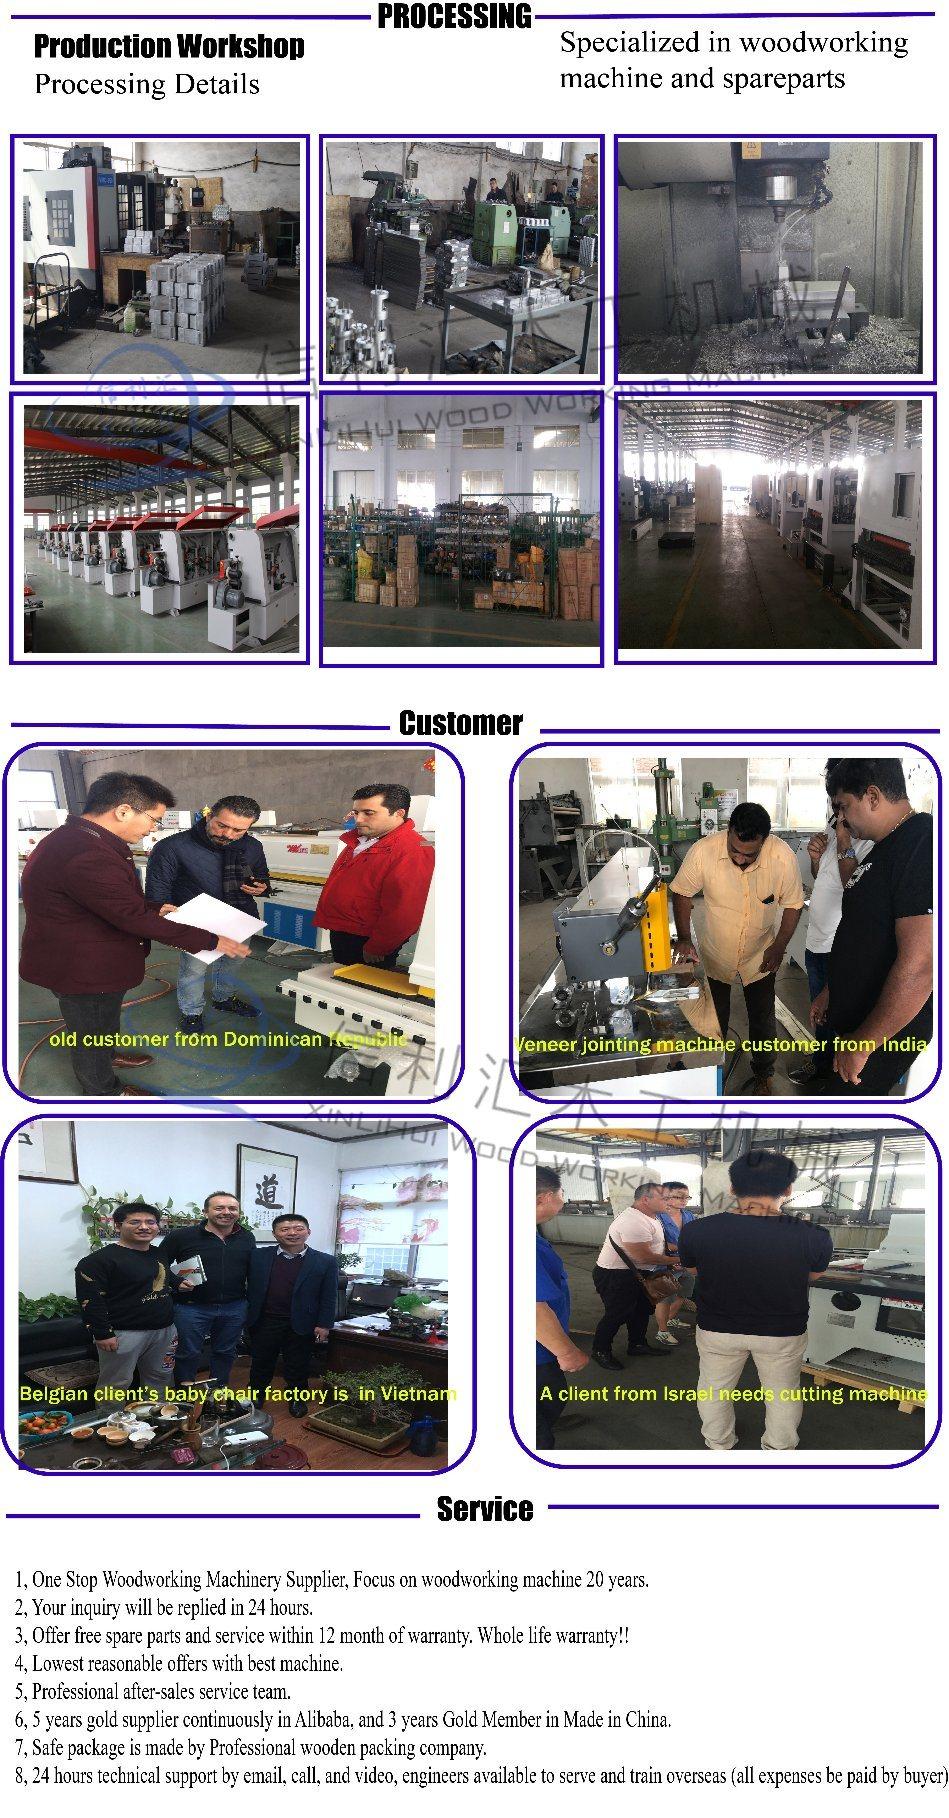 European Quality Ce Certification Automatic PVC Edge Bander Wrapping Machine/ Double Glue Cover PVC Banding Machine